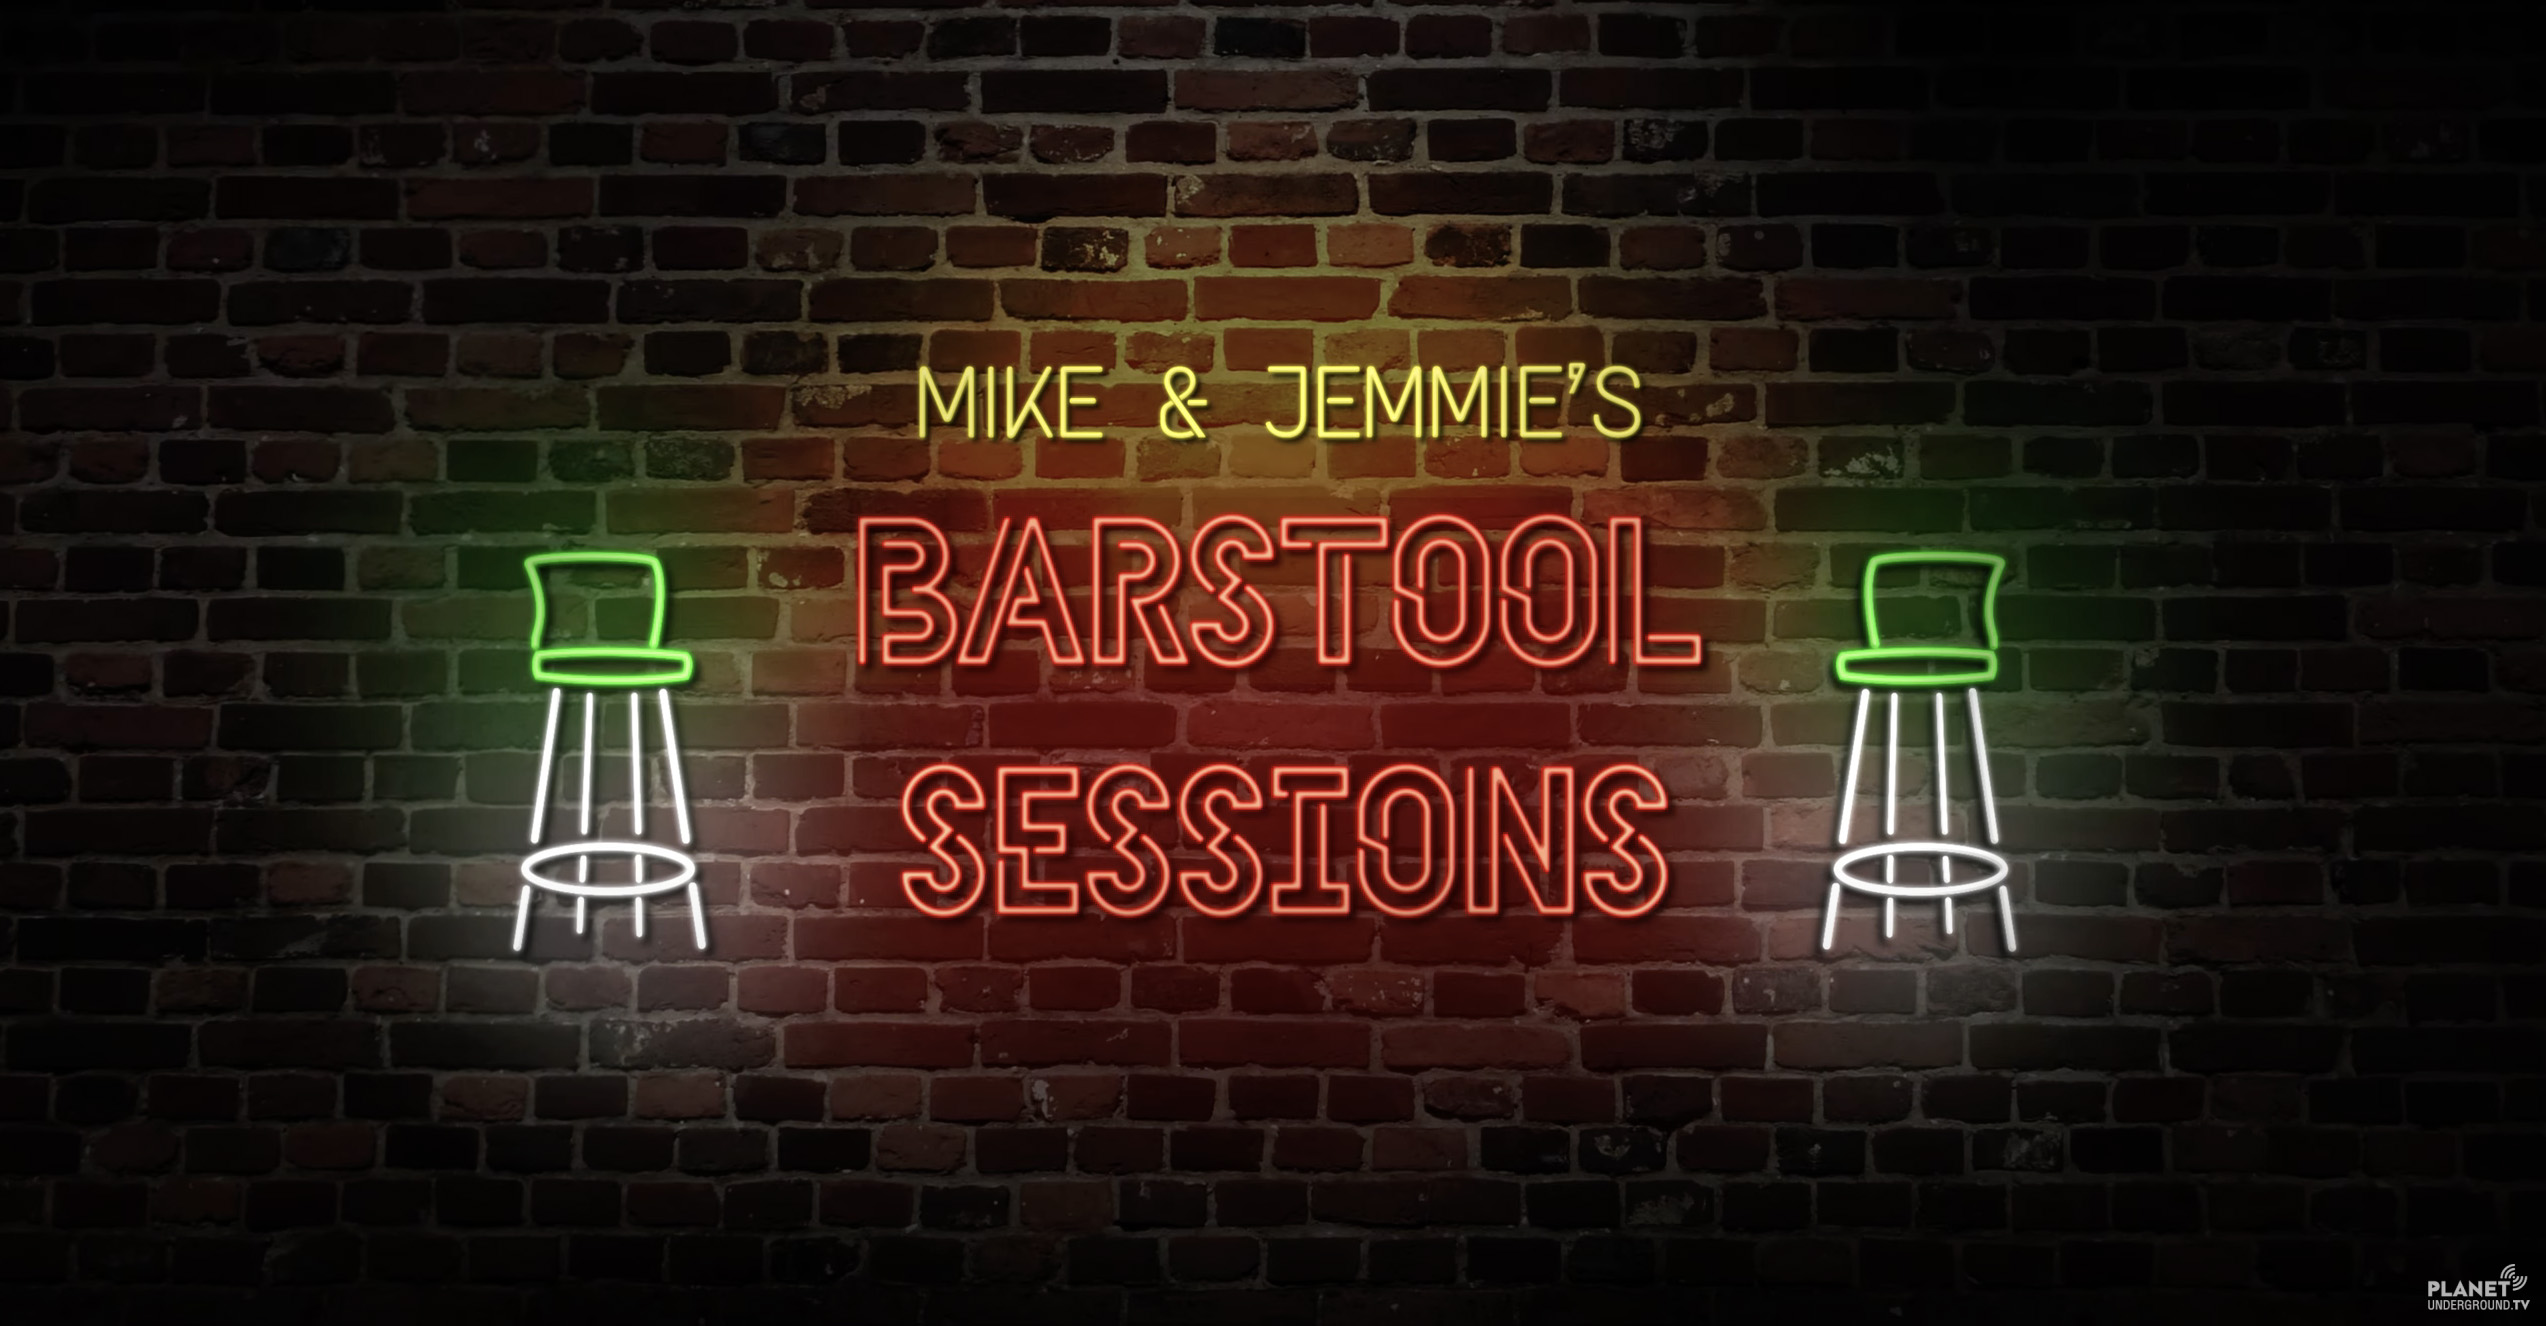 Mike and Jemmie's Barstool Sessions Episode 5